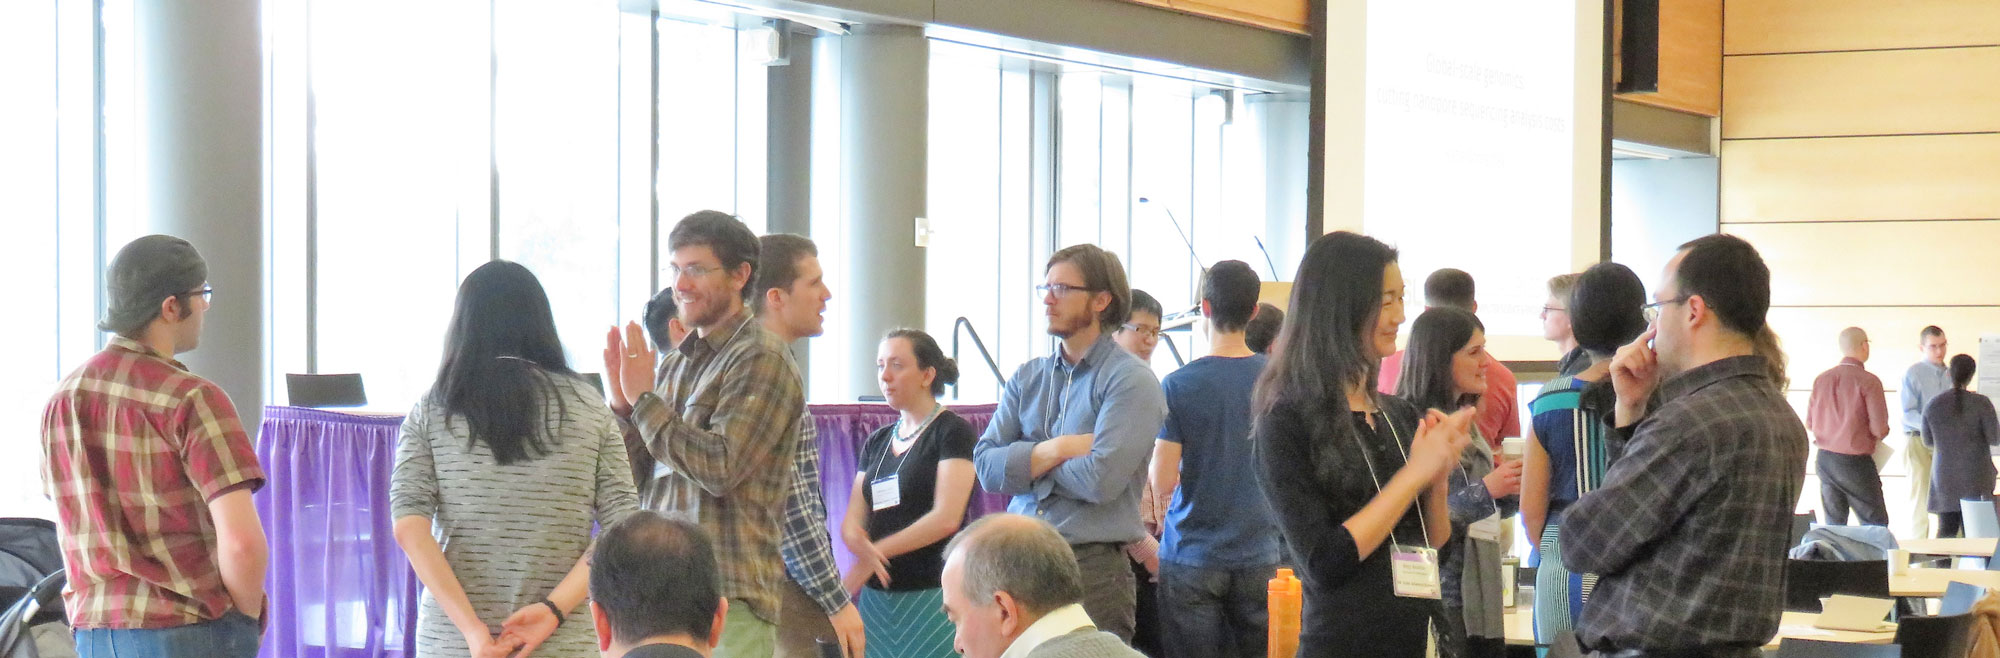 group of students chatting during the career fair